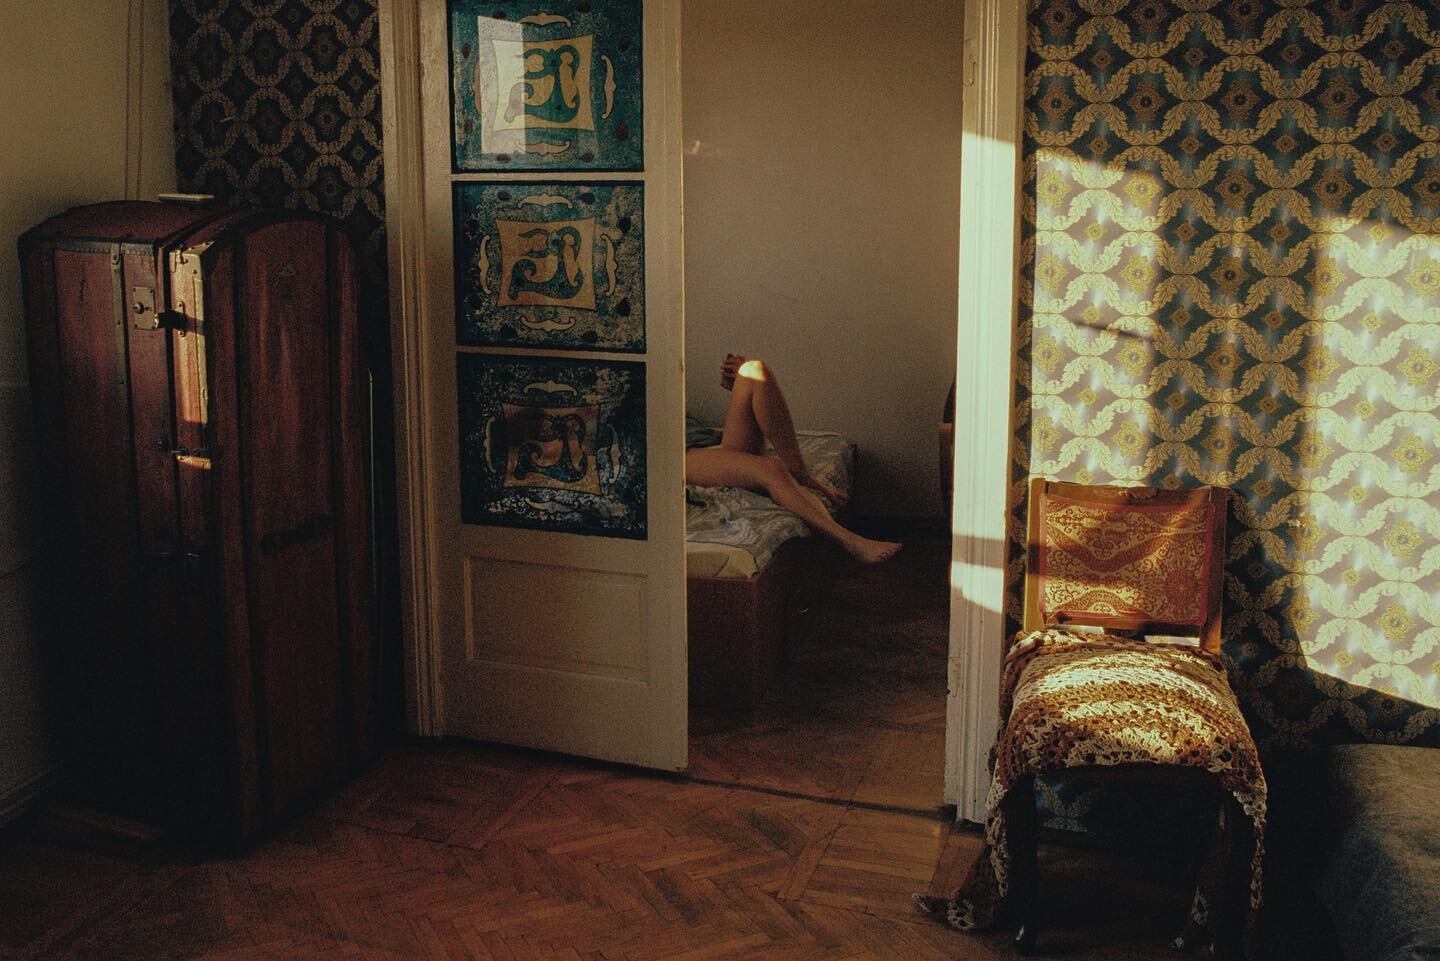 Passing time in a Bucharest apartment &bull; August, 2022

#35mmfilm